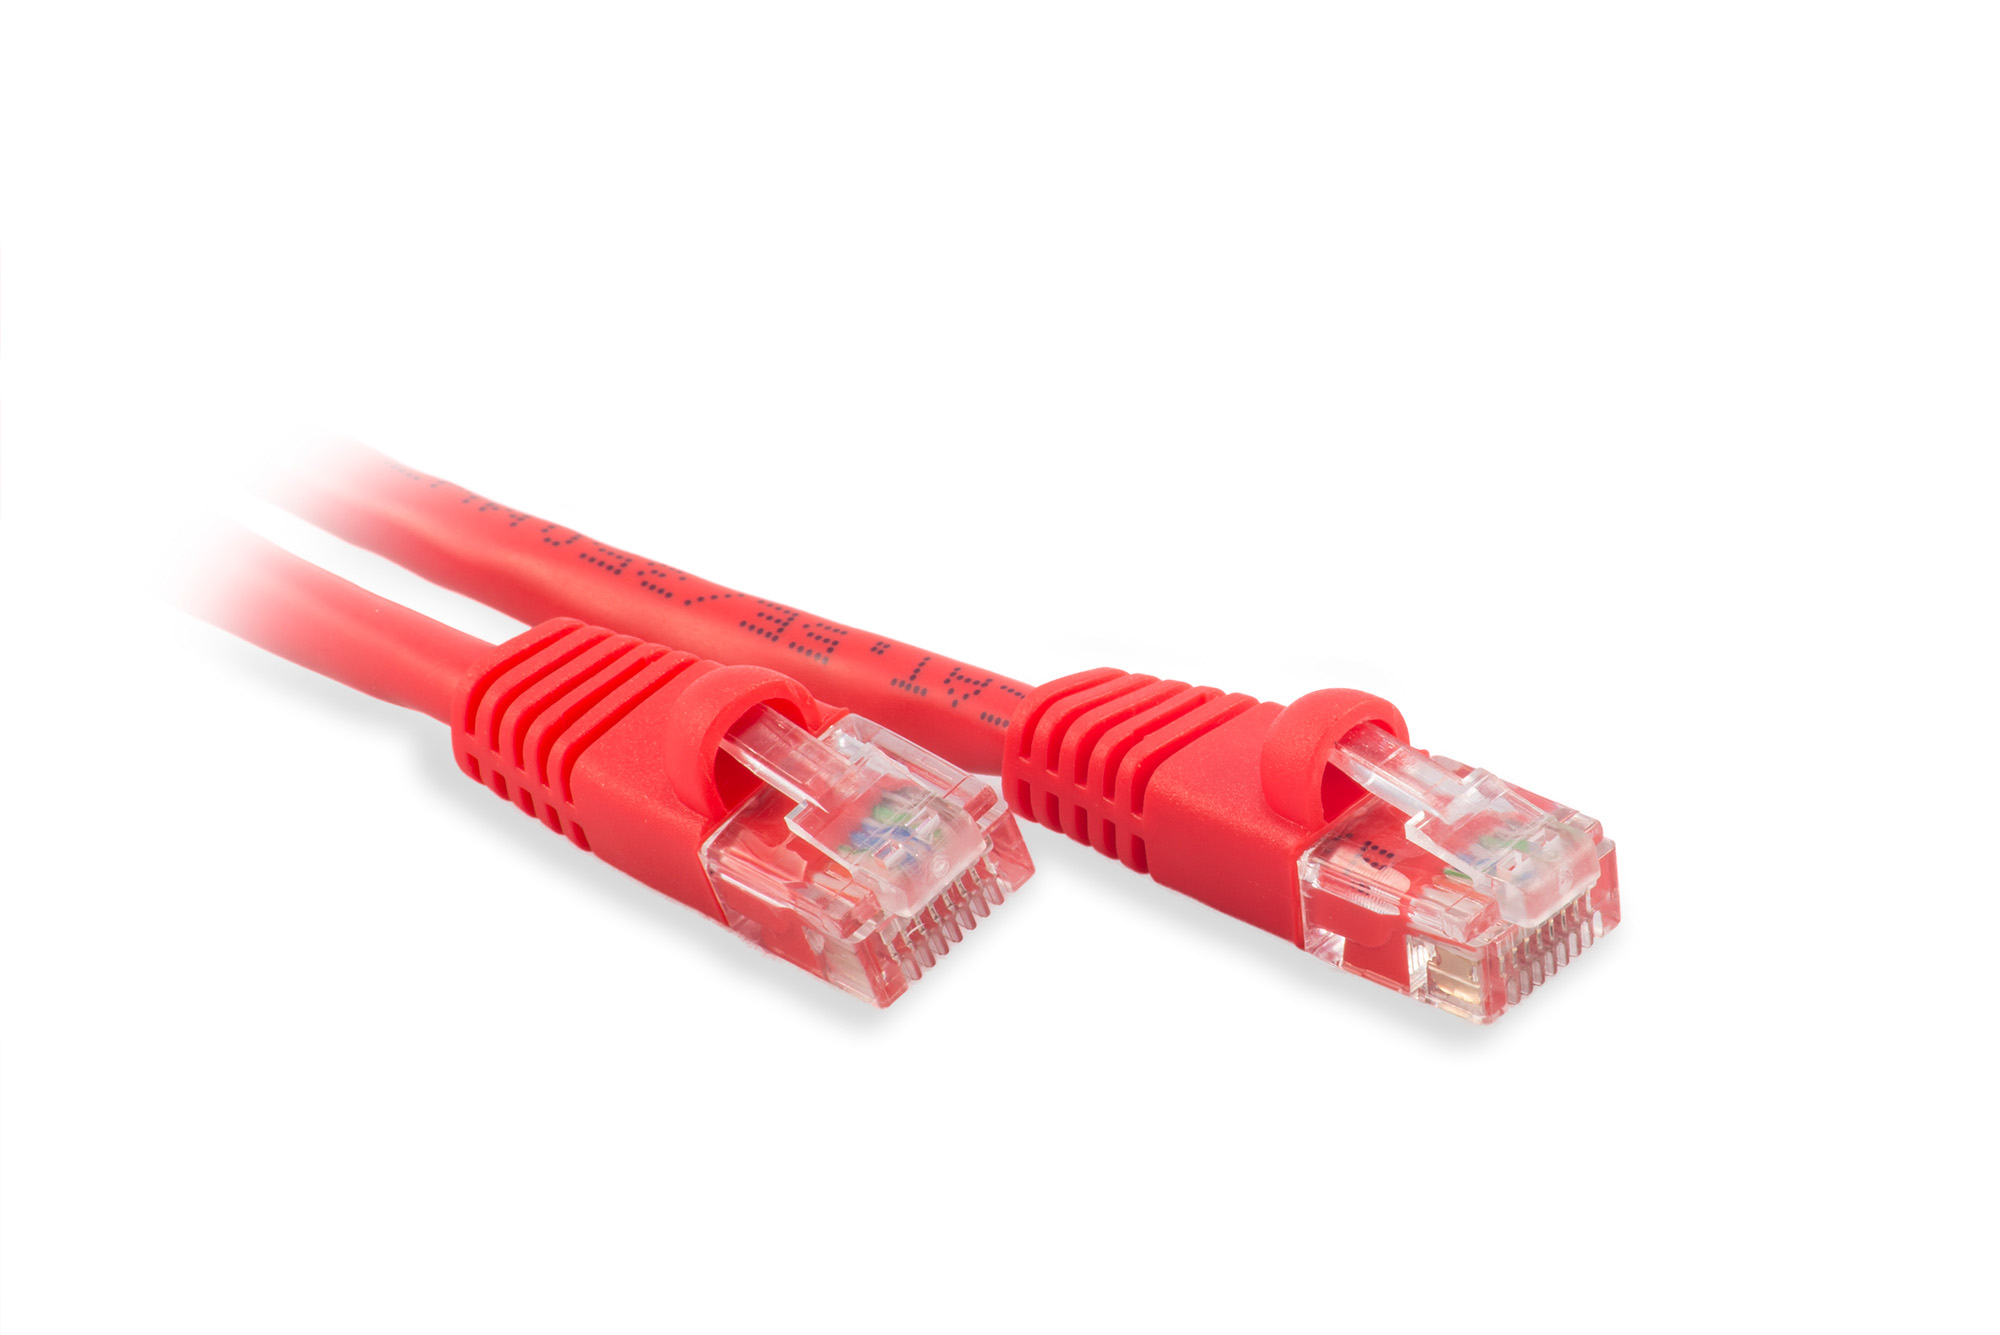 1ft Cat6 Ethernet Patch Cable - Red Color - Snagless Boot